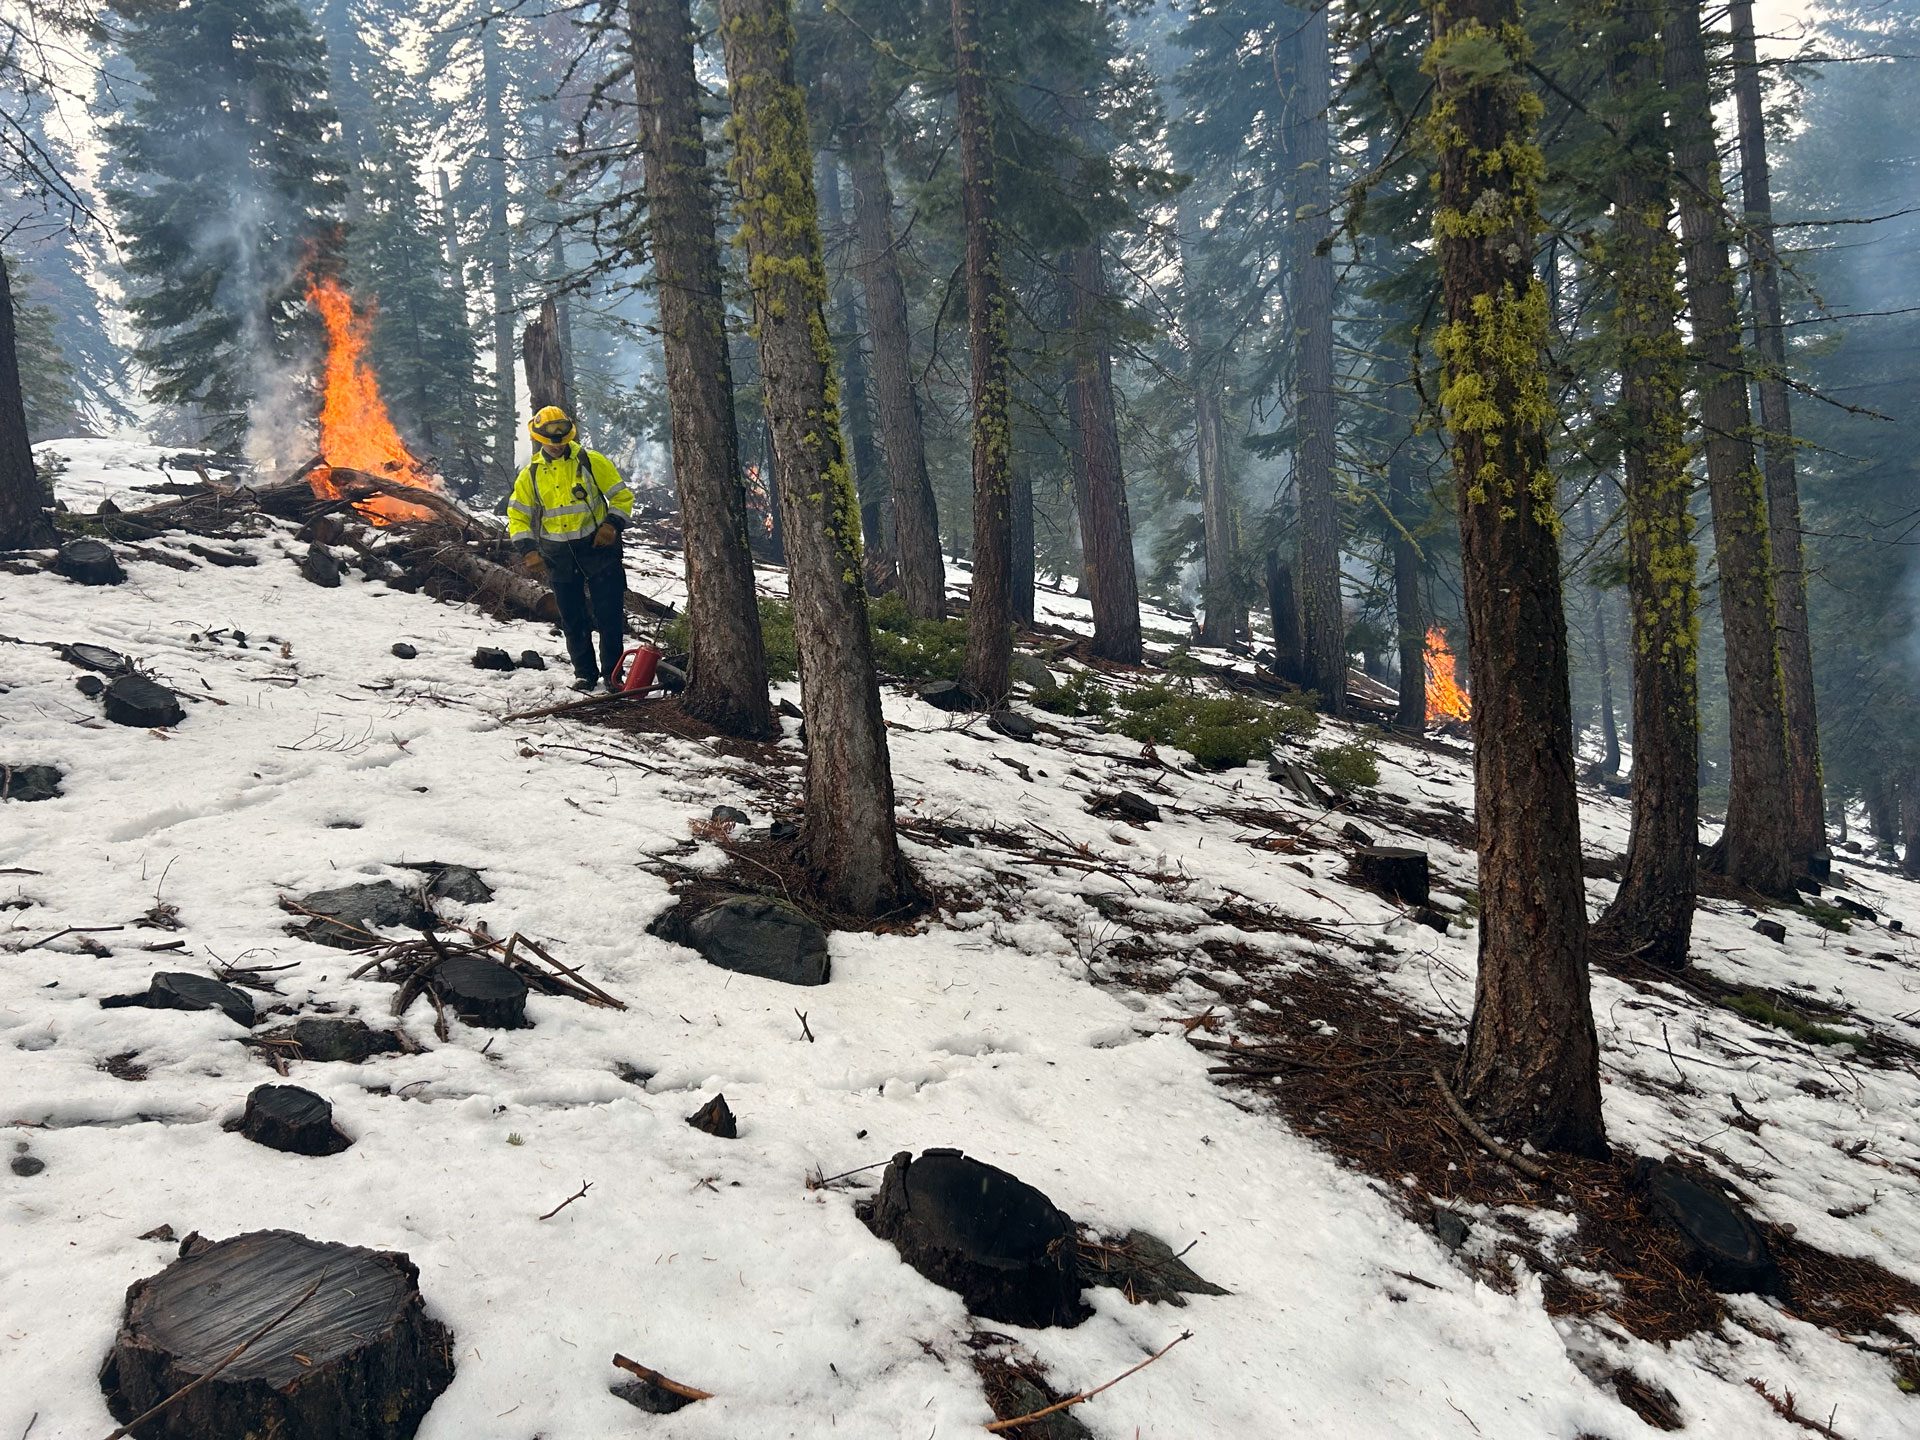 A firefighter in a yellow fireproof coat and helmet, engaged in a prescribed fire operation in a forest in winter, with snow on the ground and piles burning.